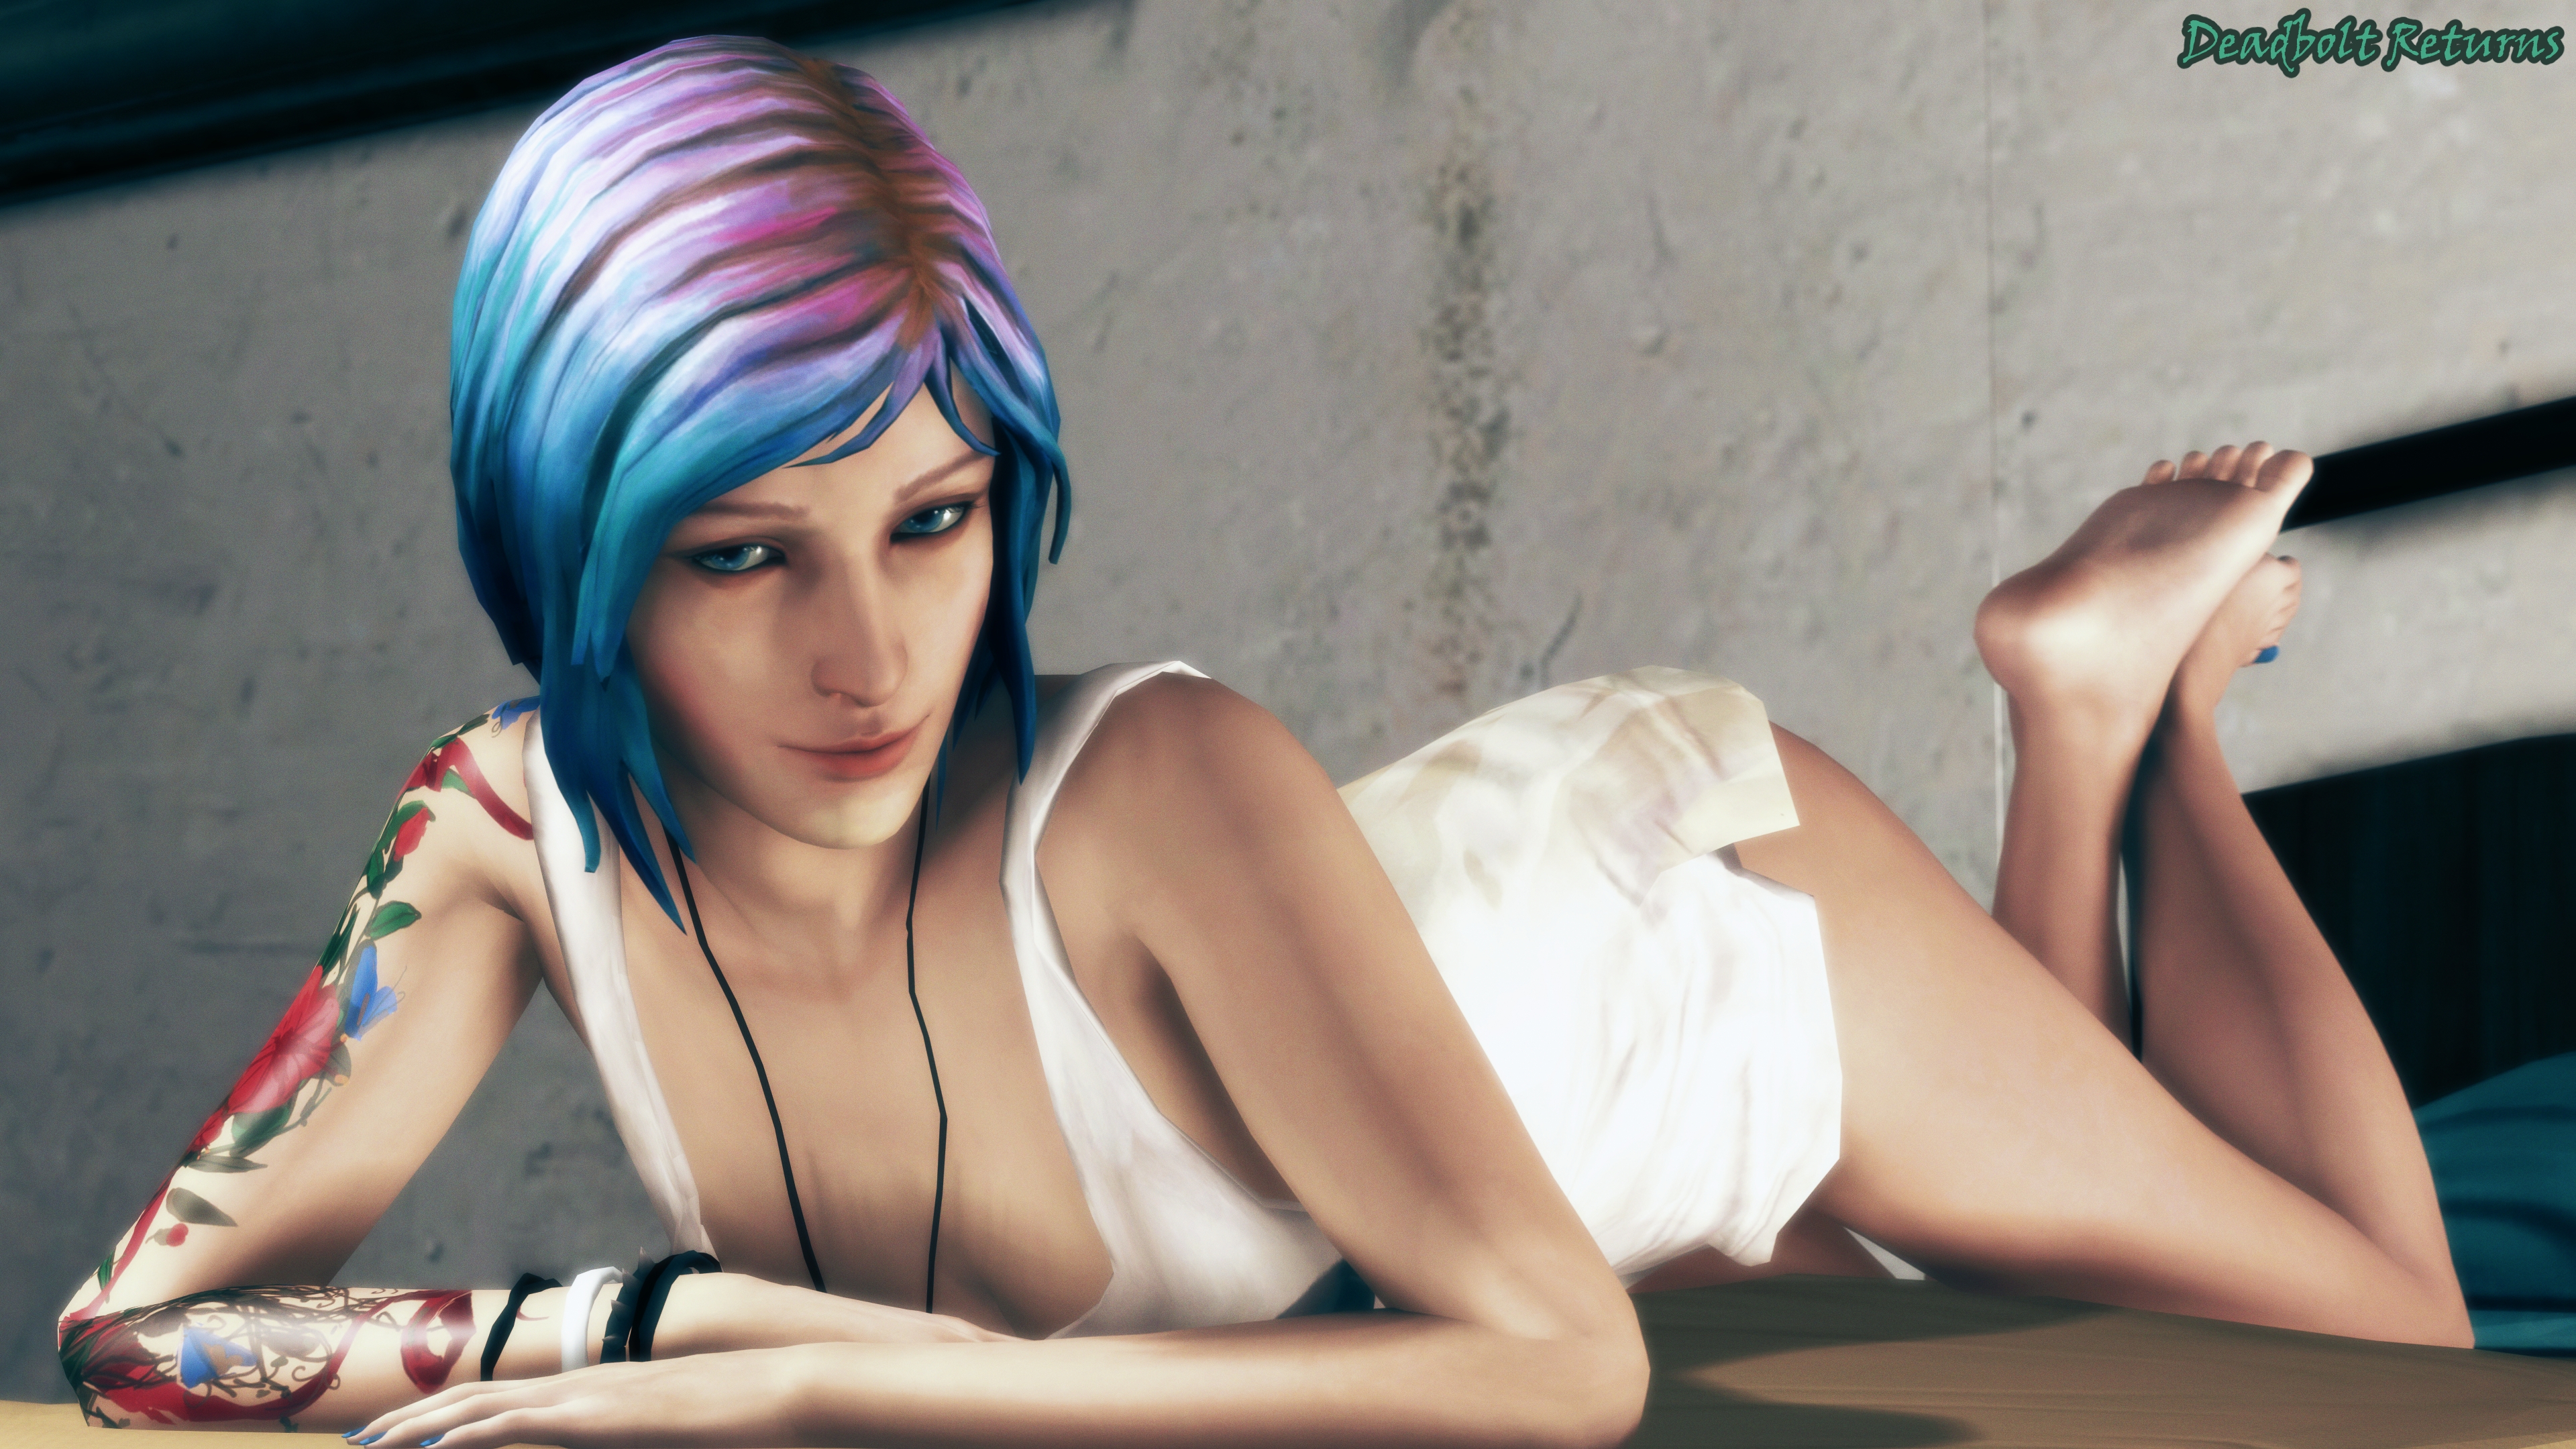 Chloe Price Returns to the Casting Couch Chloe Price Chloe Life Is Strange Sfm Source Filmmaker Rule34 Rule 34 3d Porn 3d Girl 3dnsfw Nsfw Casting Couch 5